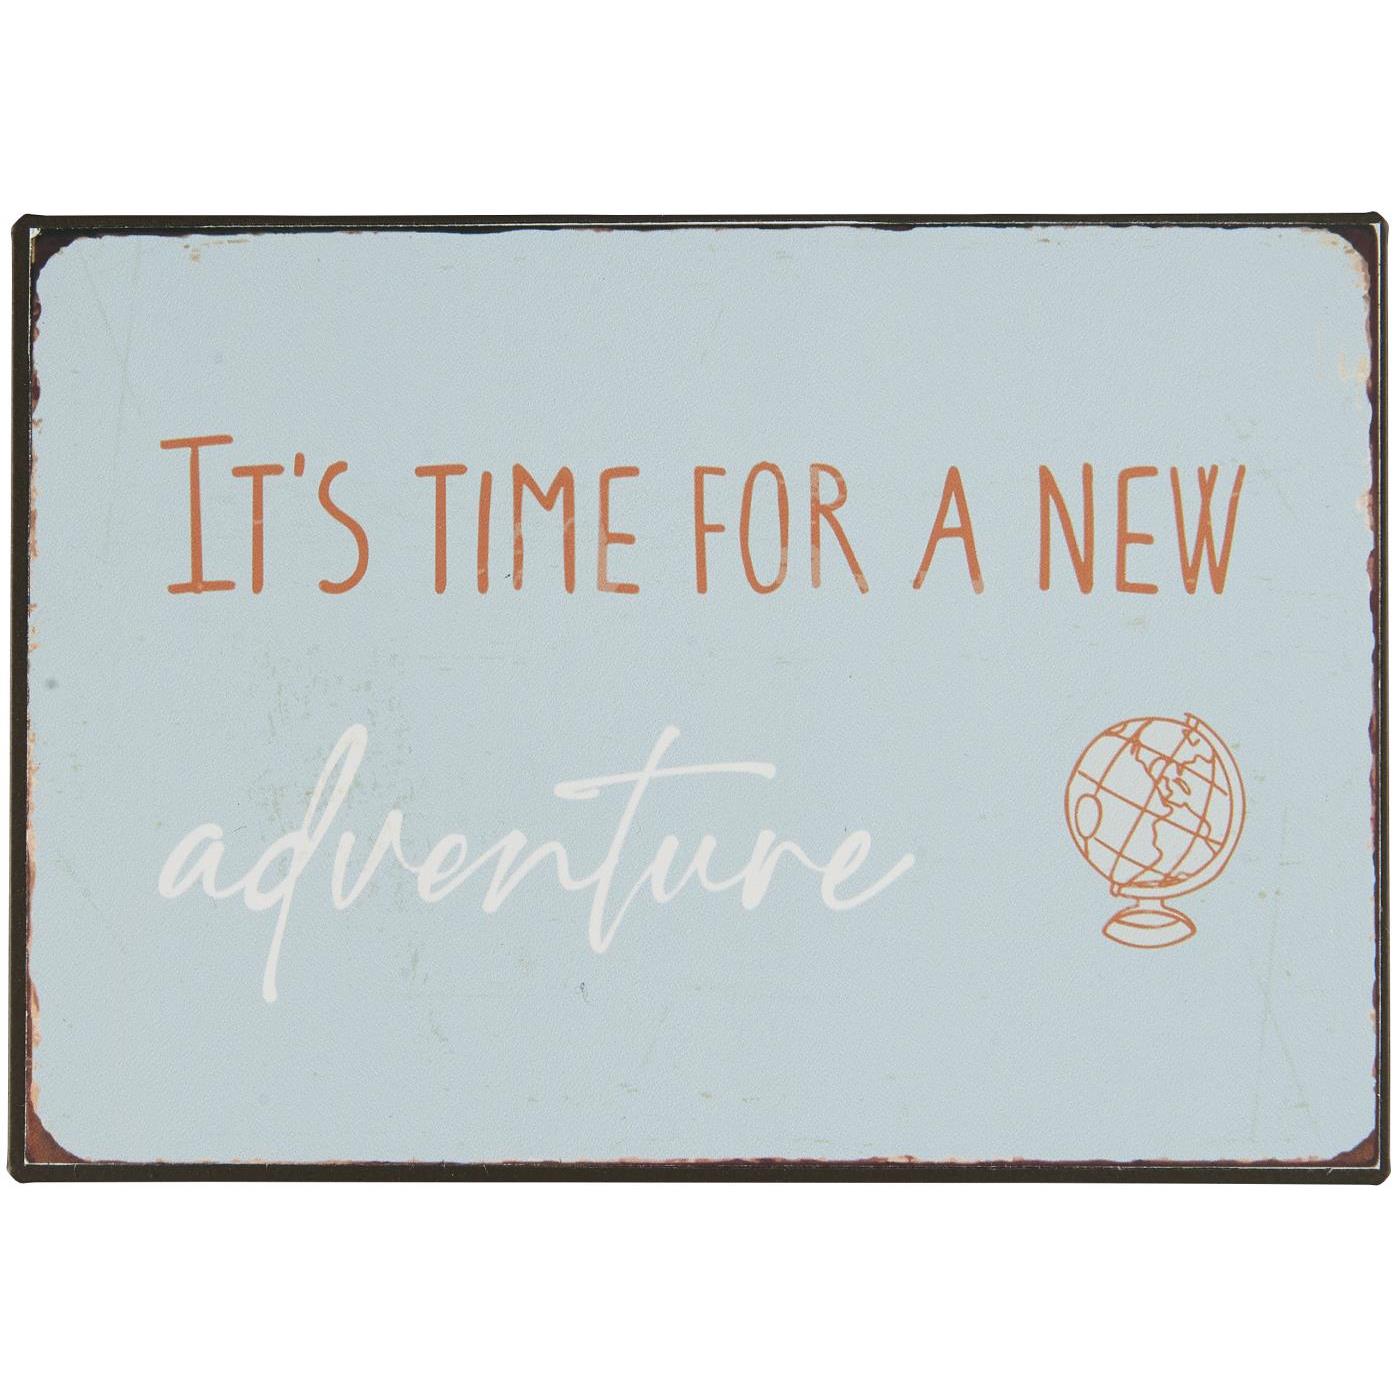 Ib Laursen Placa Metal "It's Time for a New Adventure"